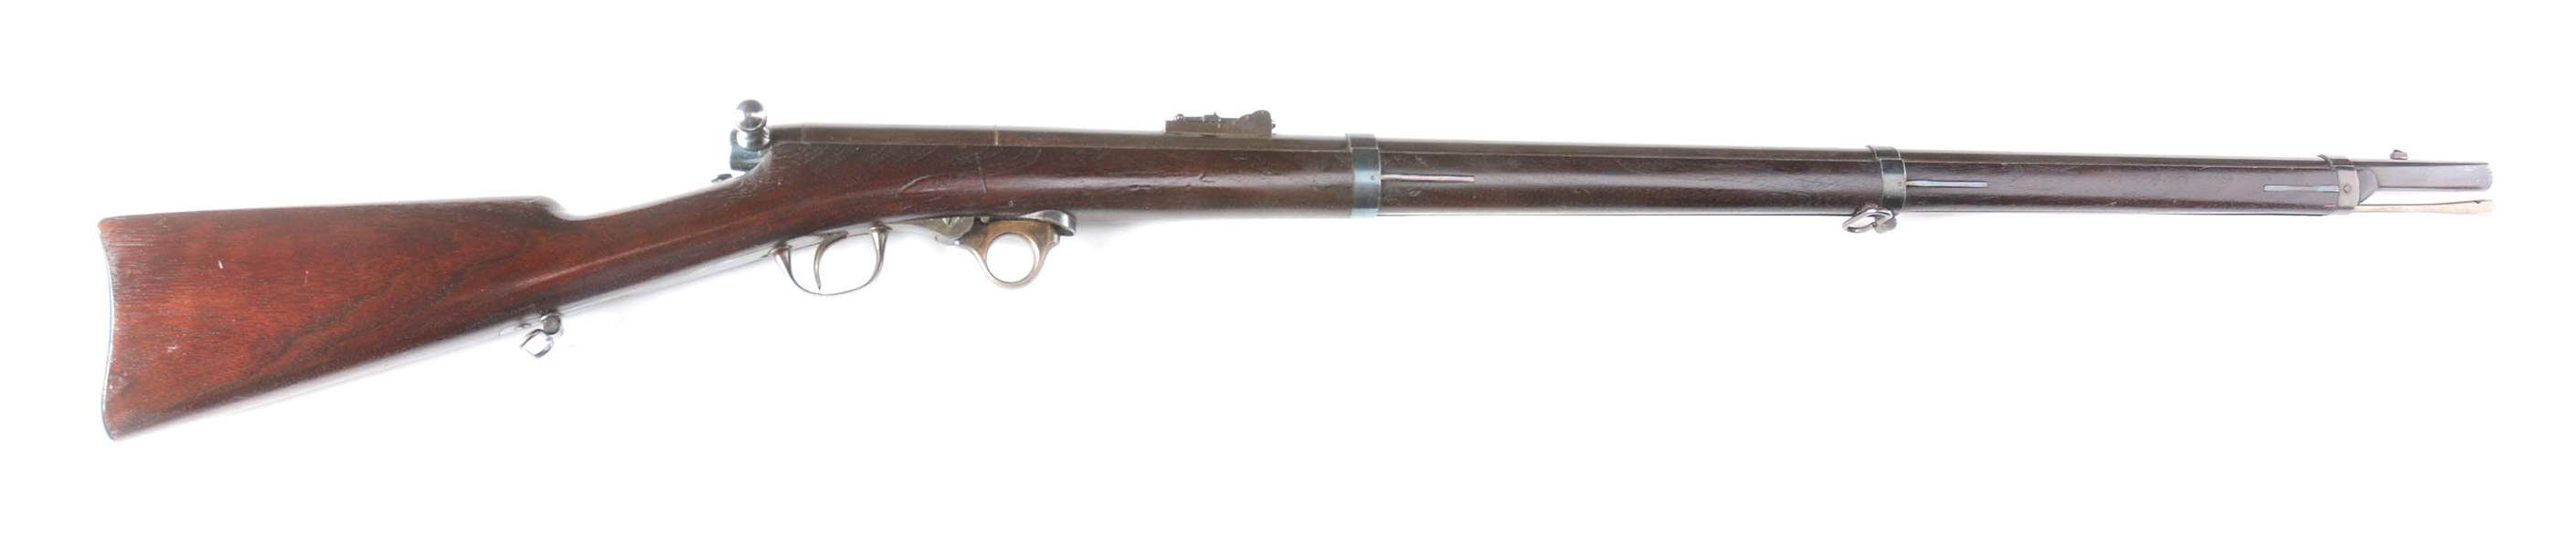 (A) GREENE BREECHLOADING BOLT ACTION RIFLE BY A.H. WATERS ARMORY.